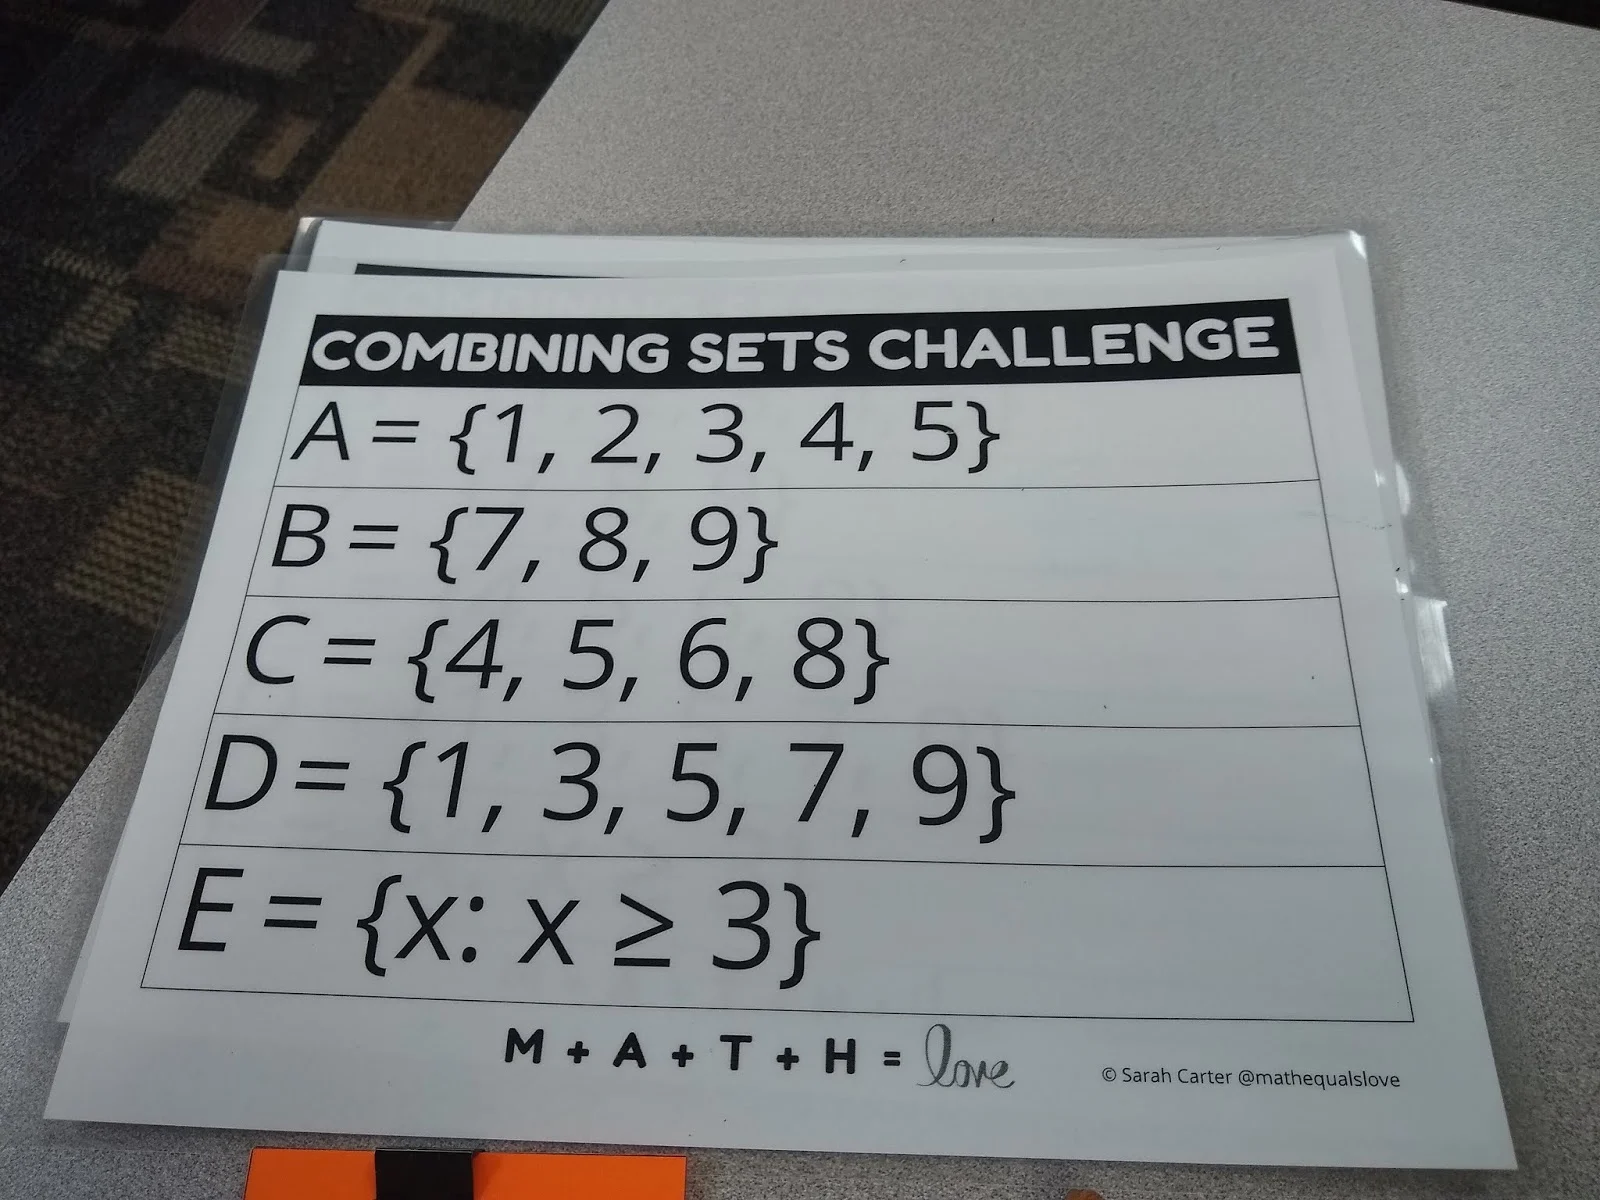 Combining Sets Challenge - Activity to give math students practice with set notation